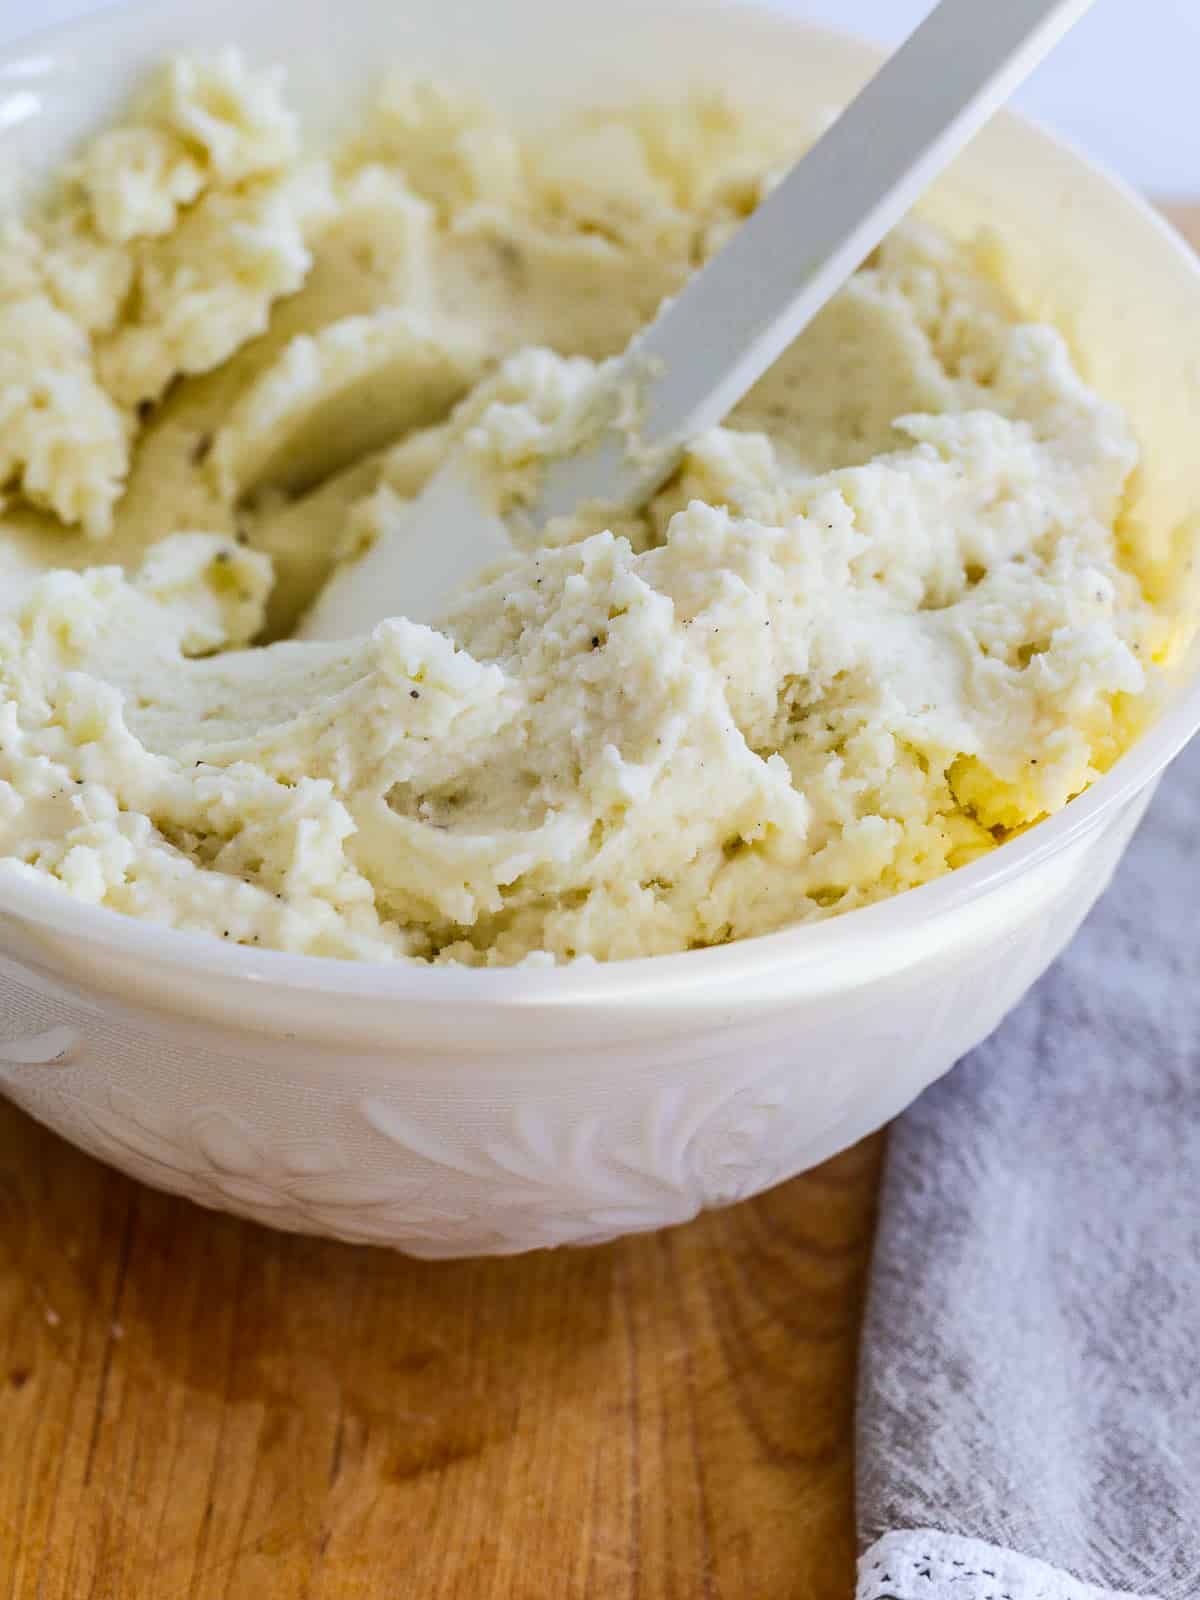 A large white spatula inside a white bowl filled with fluffy mashed potatoes.